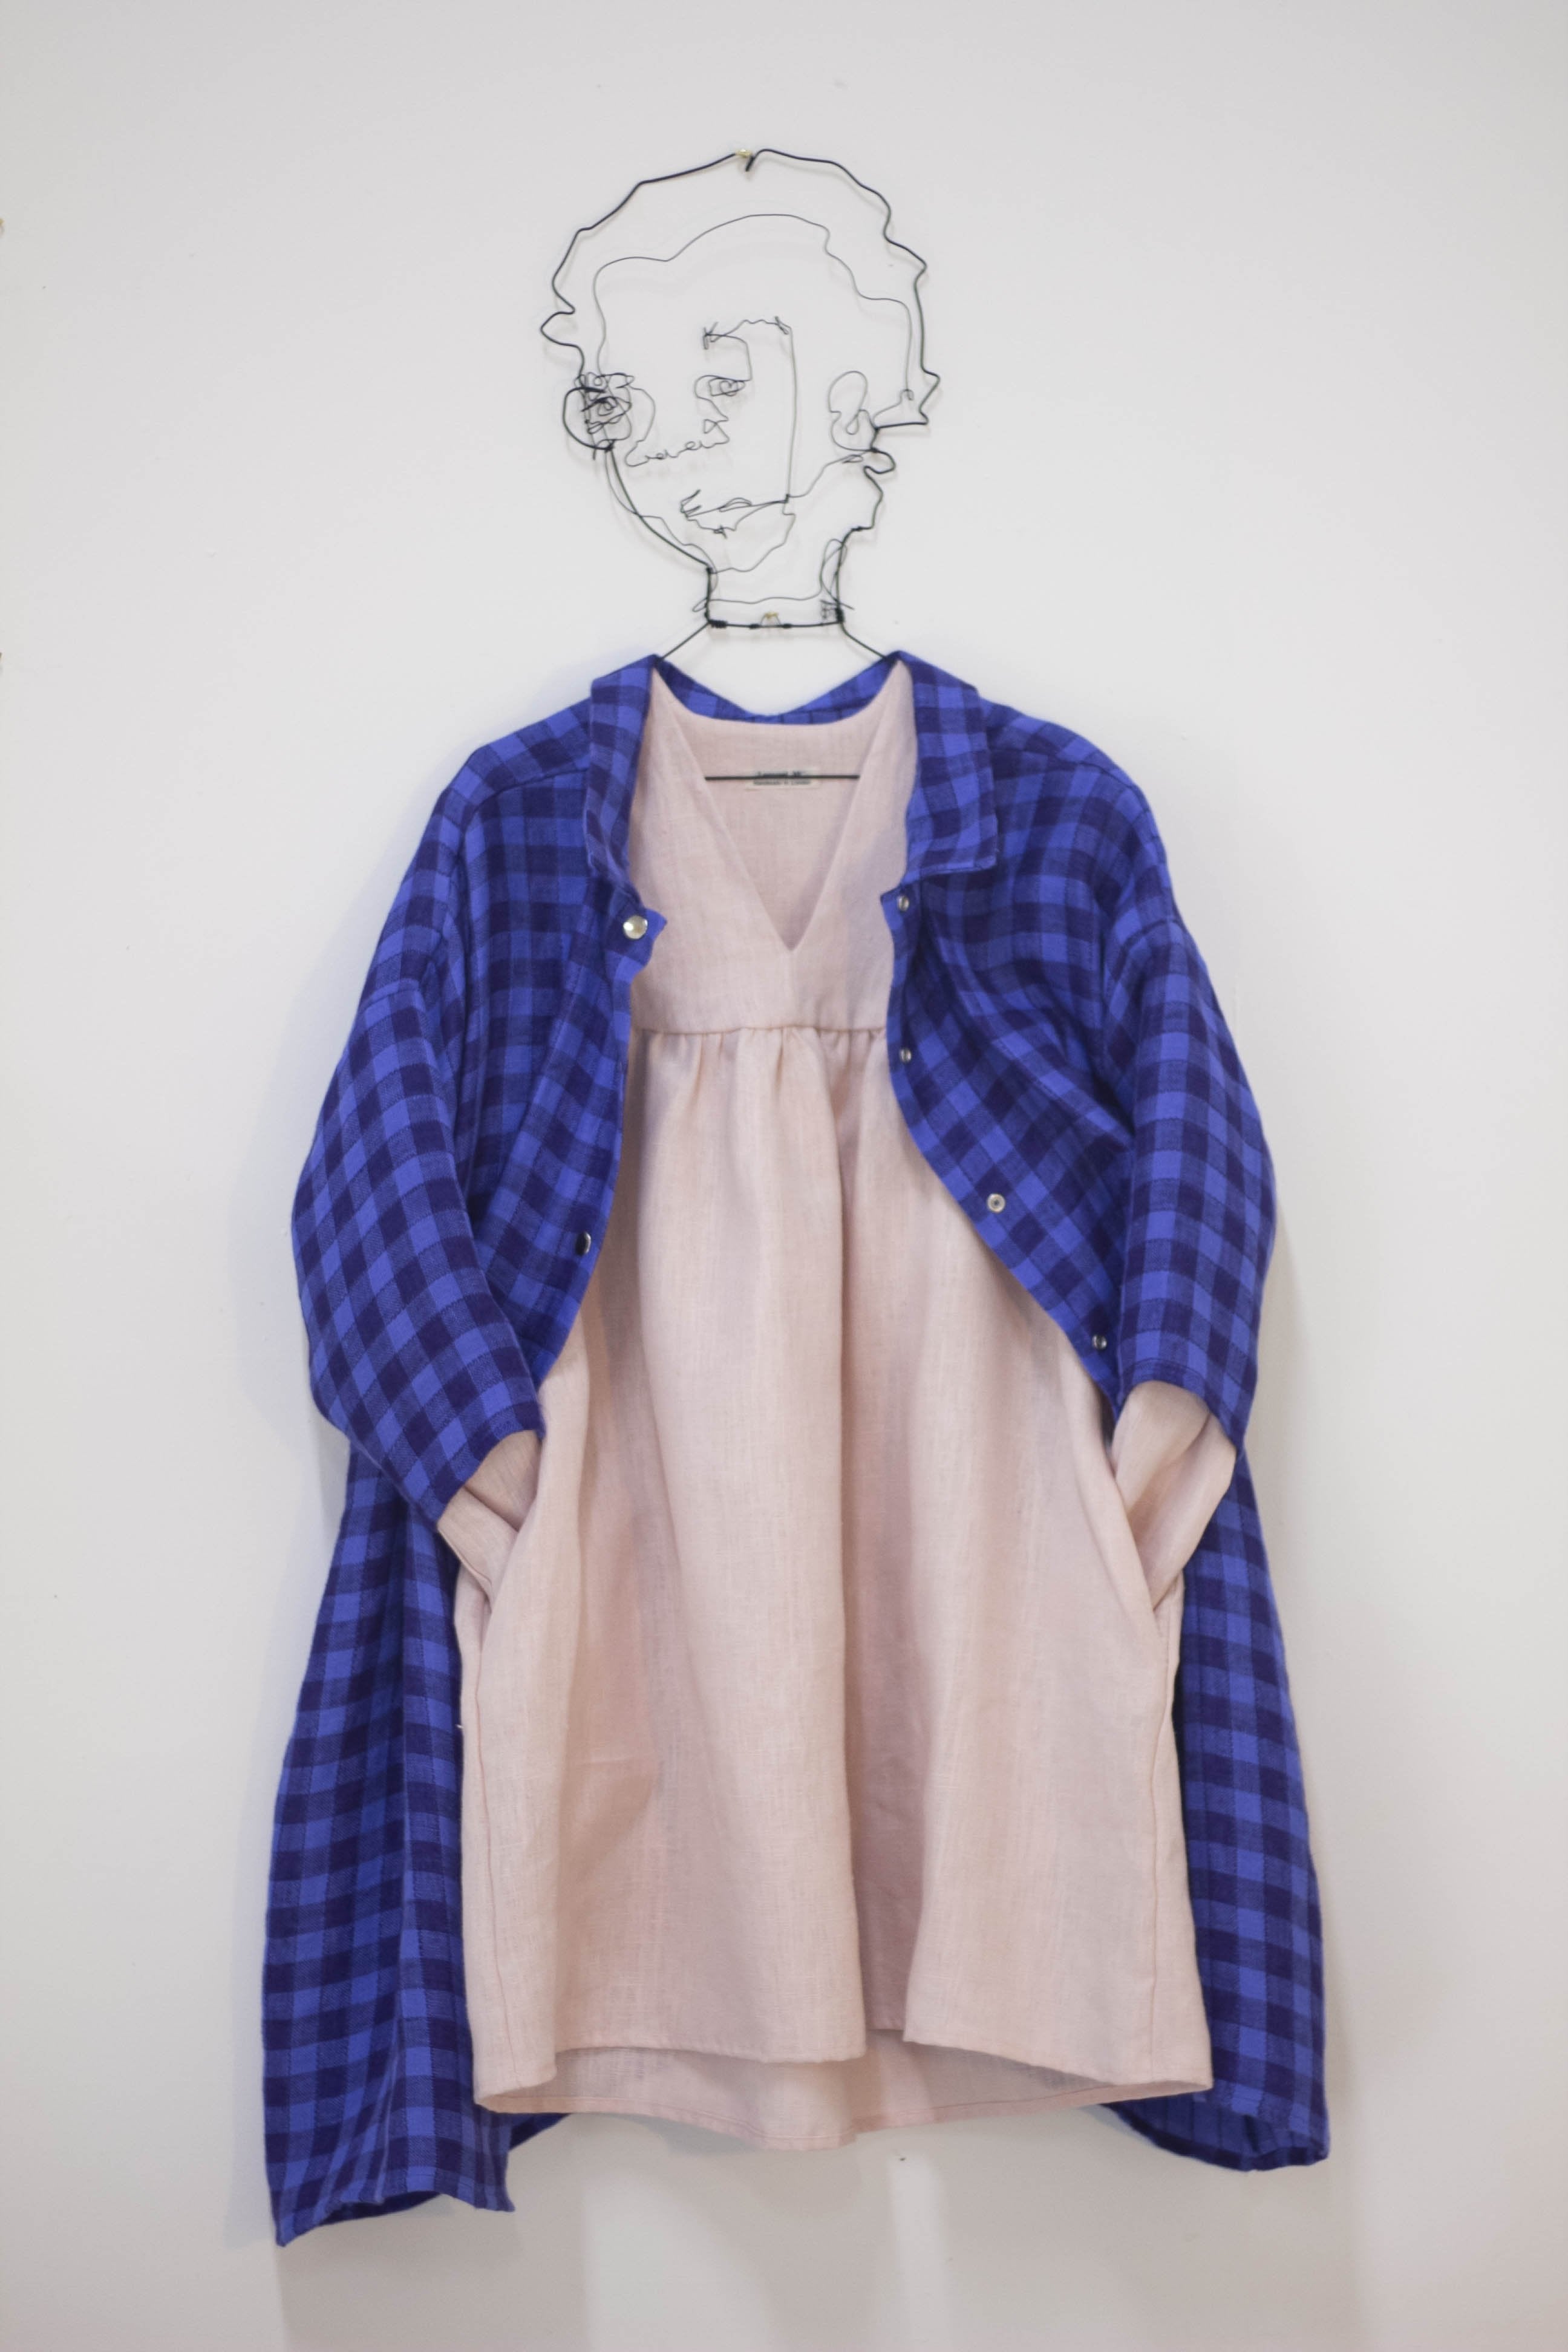 Classic dress with 3/4 sleeves in royal blue/black checked made from 100% linen